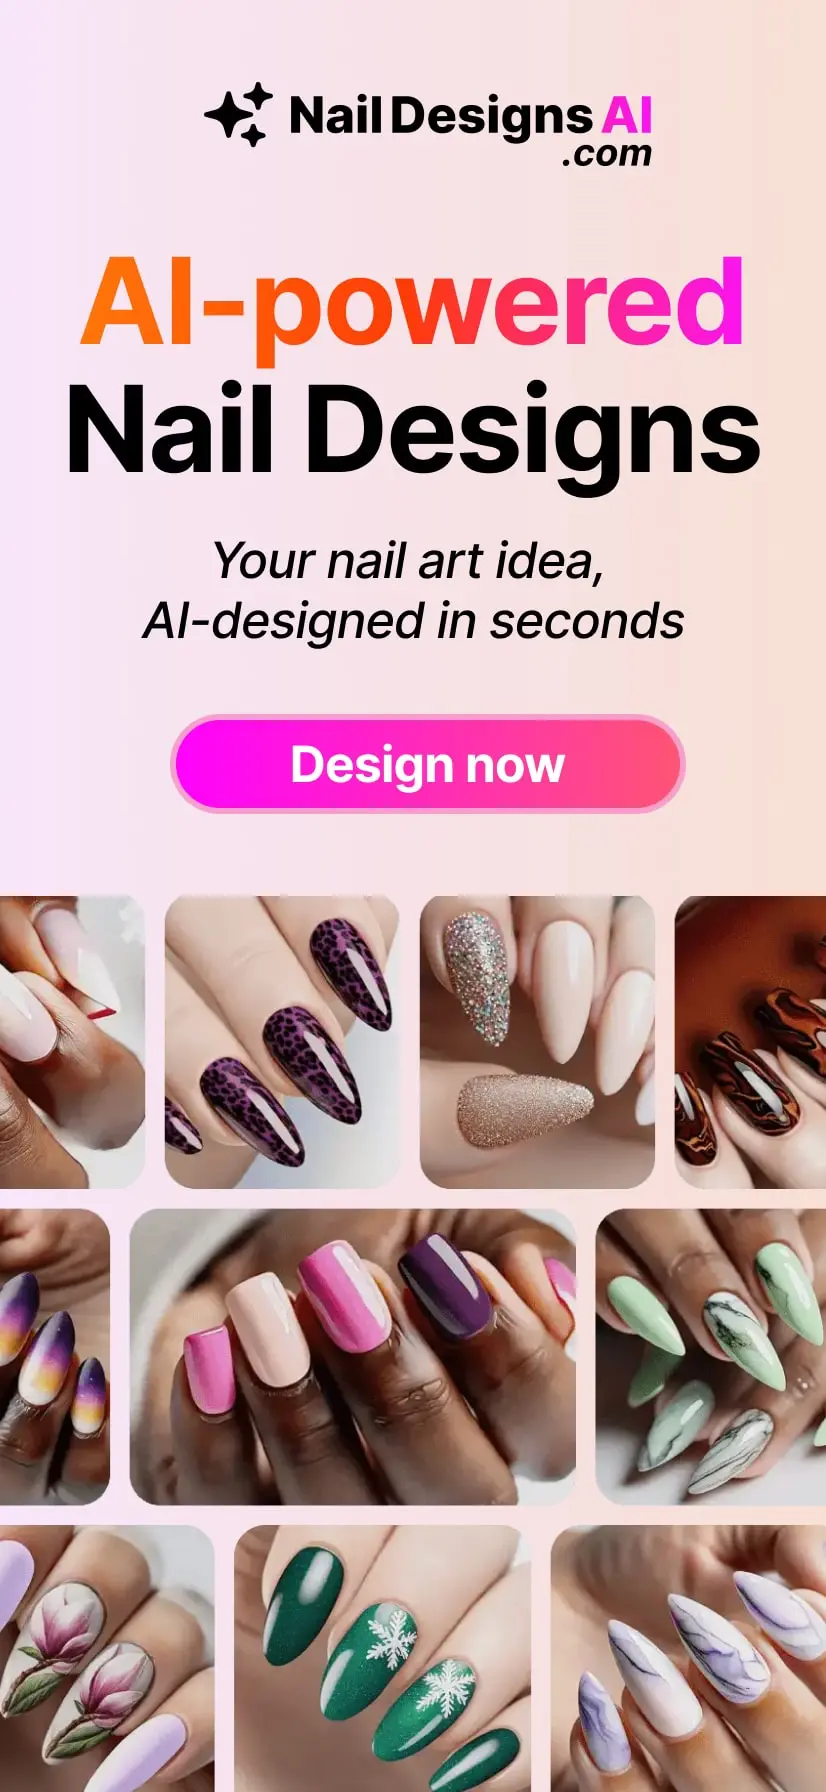 naildesignsai.com - AI-powered Nail Designs. Simply describe your nail art idea—any shape, color, or style—and our AI bring it to life in seconds